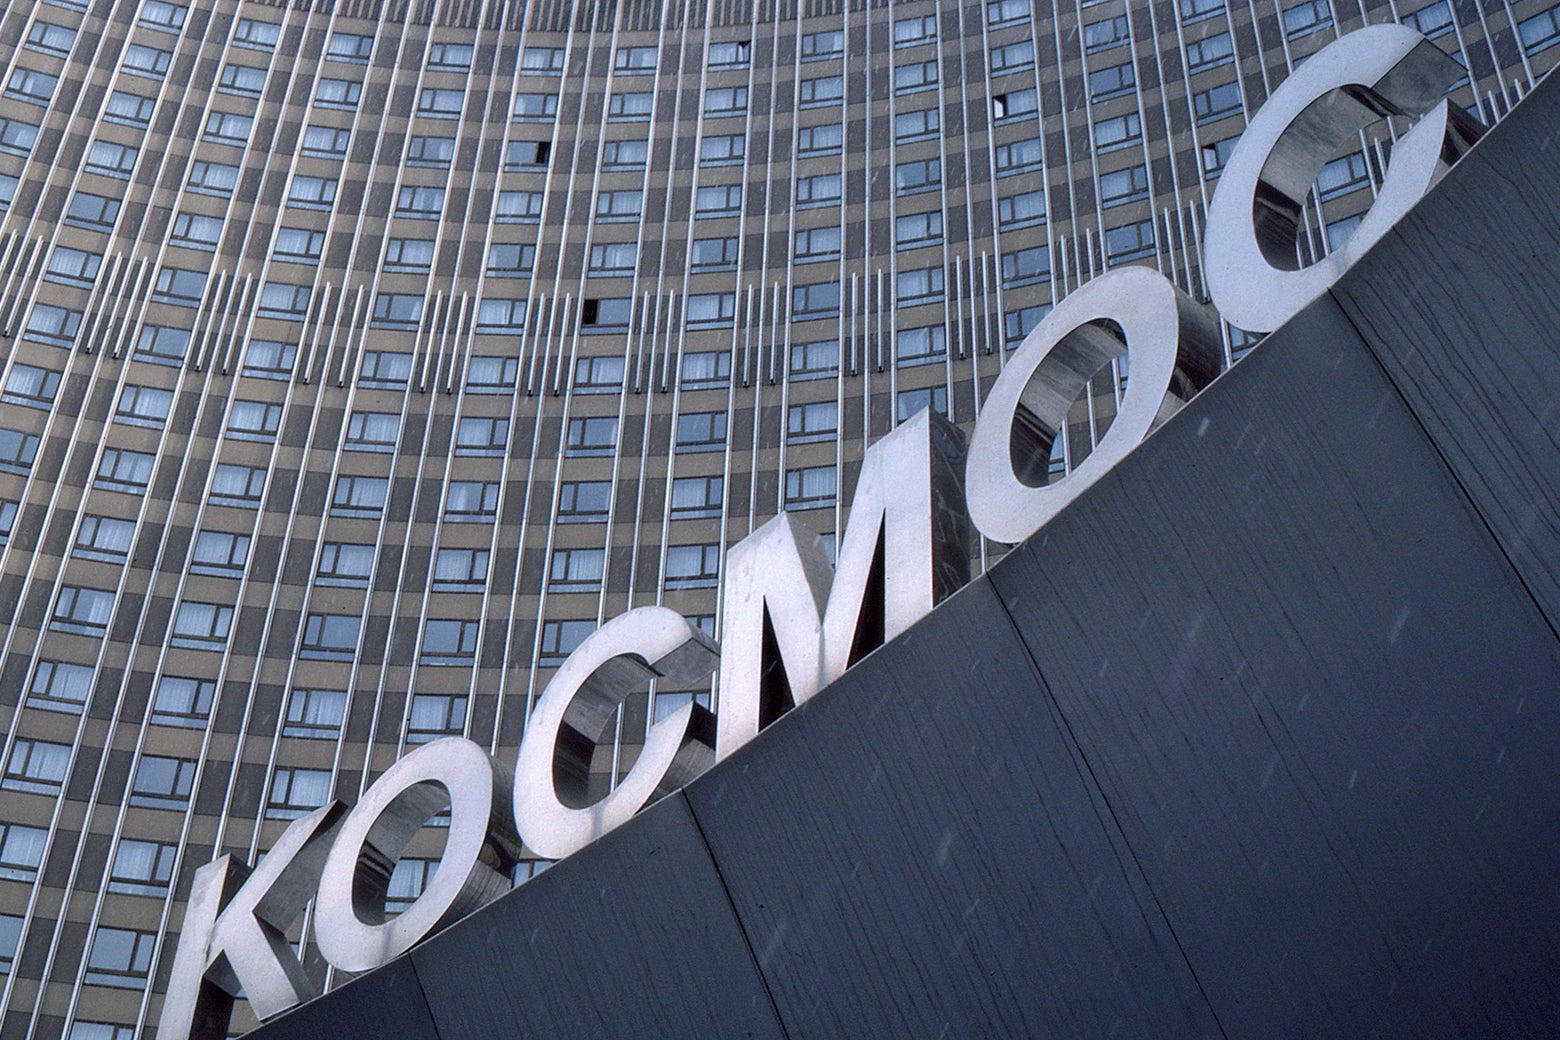 The exterior of the Kosmos hotel in Moscow.